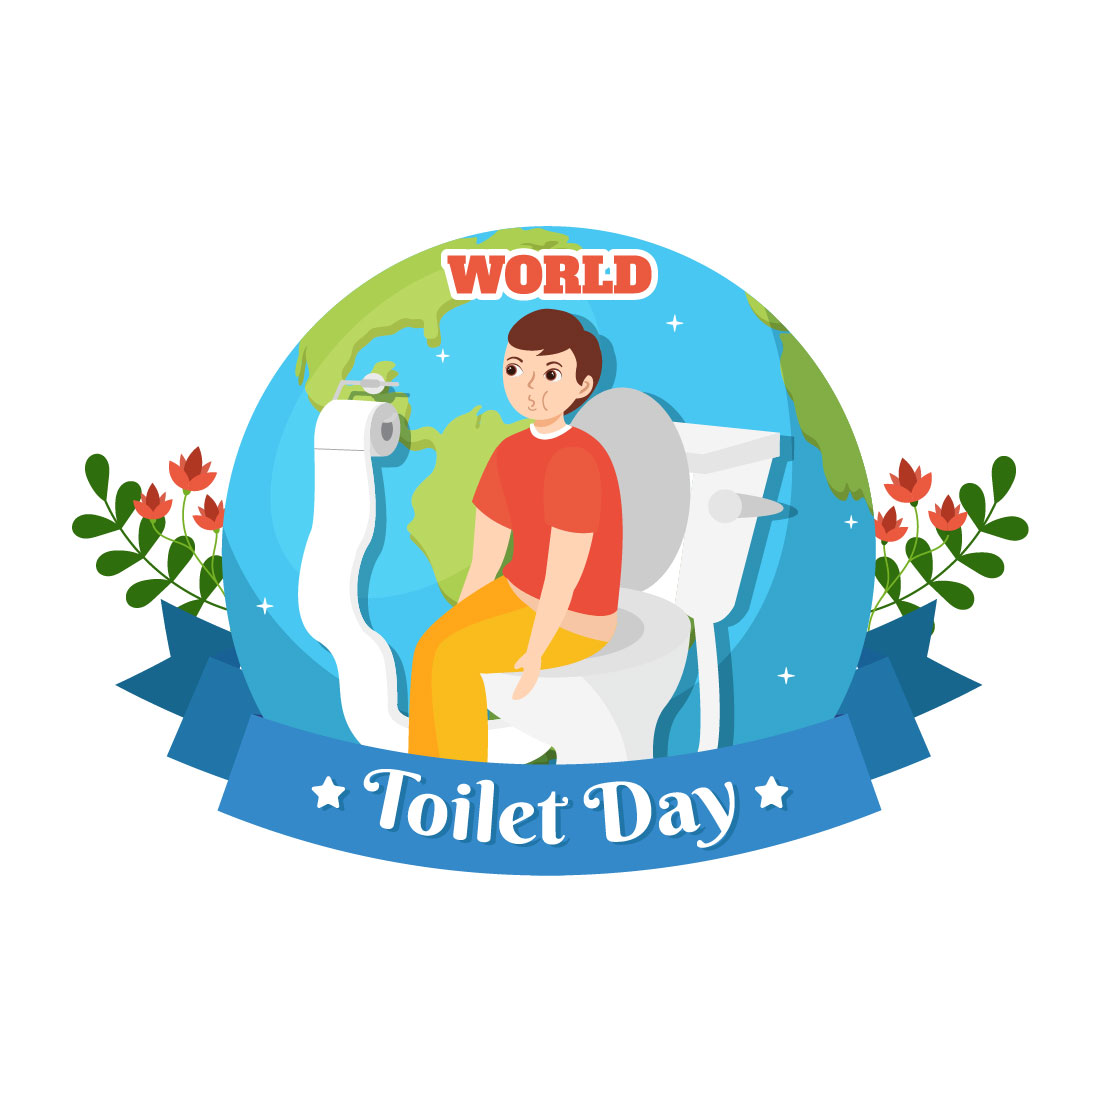 11 World Toilet Day Illustration preview image.